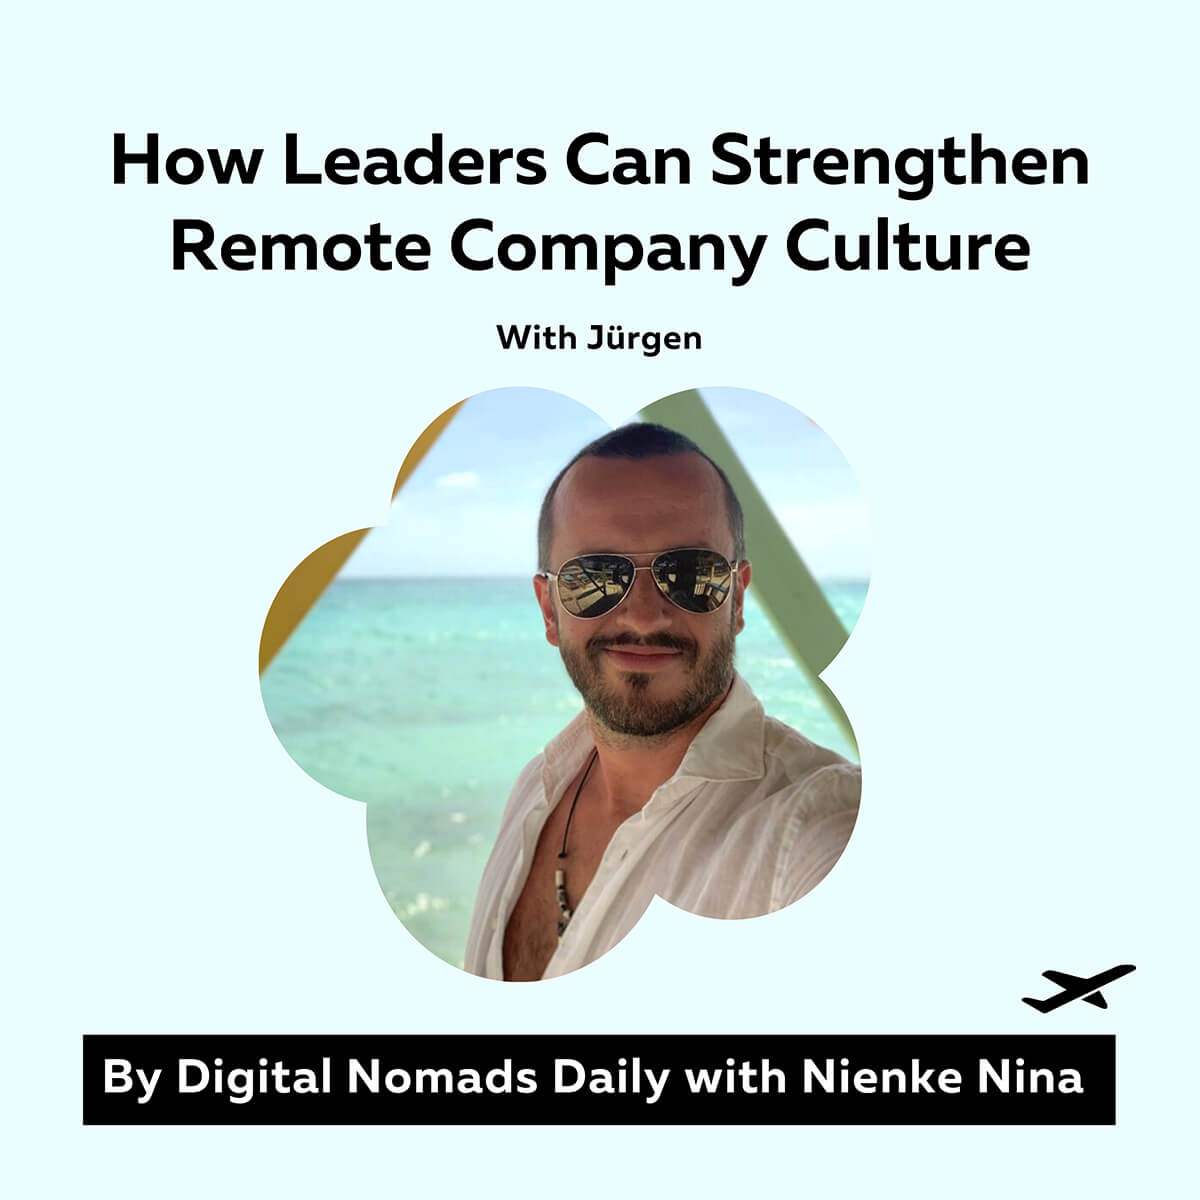 Digital Nomads Daily Podcast Cover Episode 39 How Leaders Can Strengthen Remote Company Culture with Jürgen Pretsch01 (1)